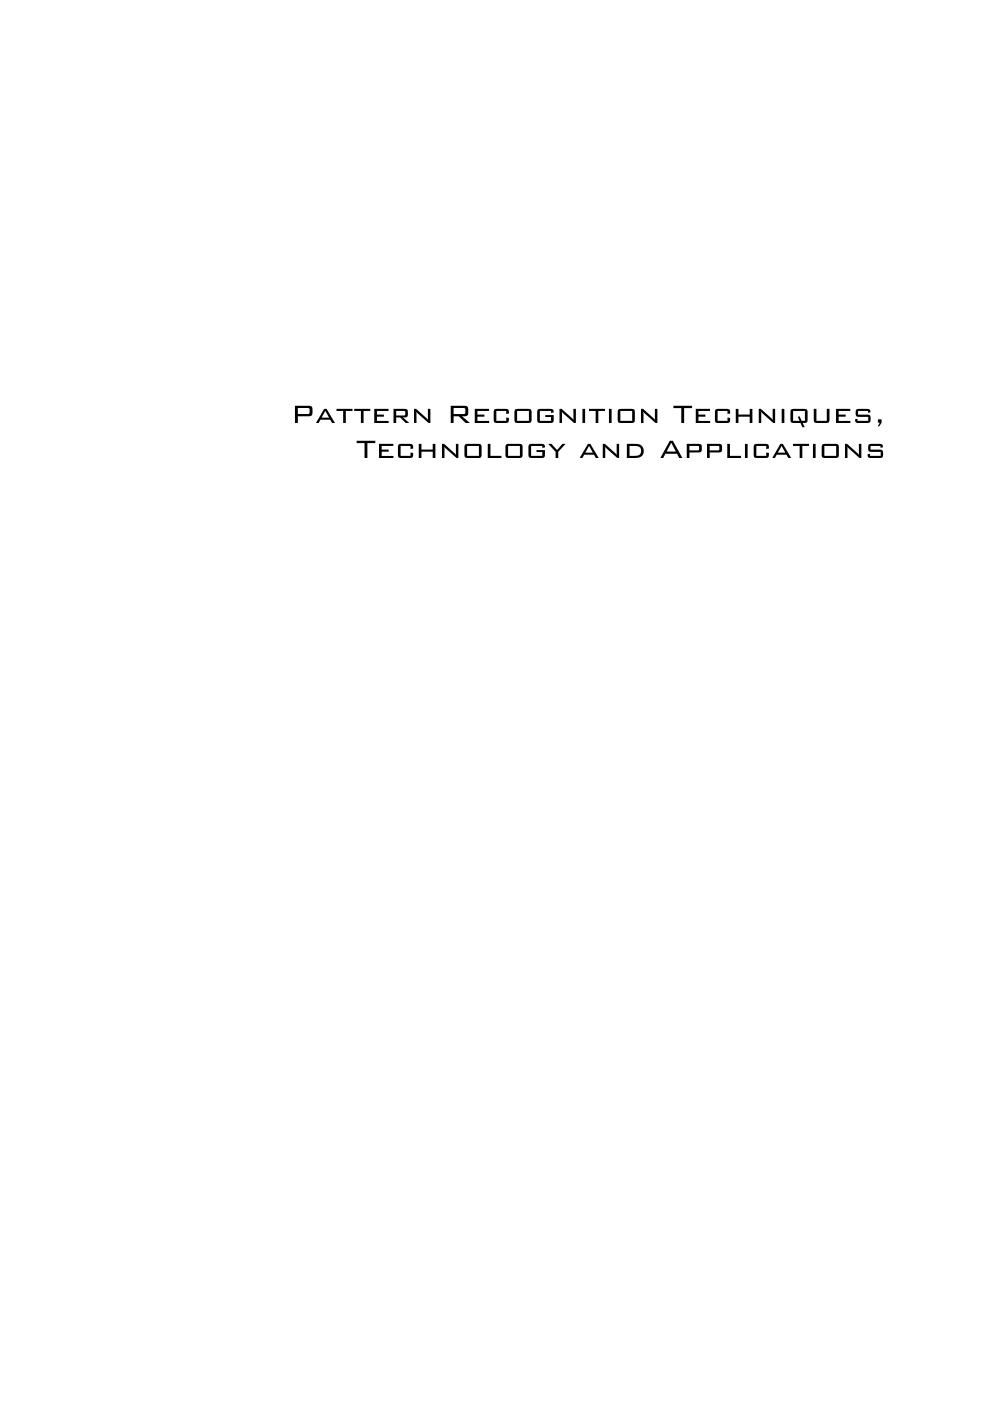 Microsoft Word - Preface&Contents_Pattern_Recognition.doc